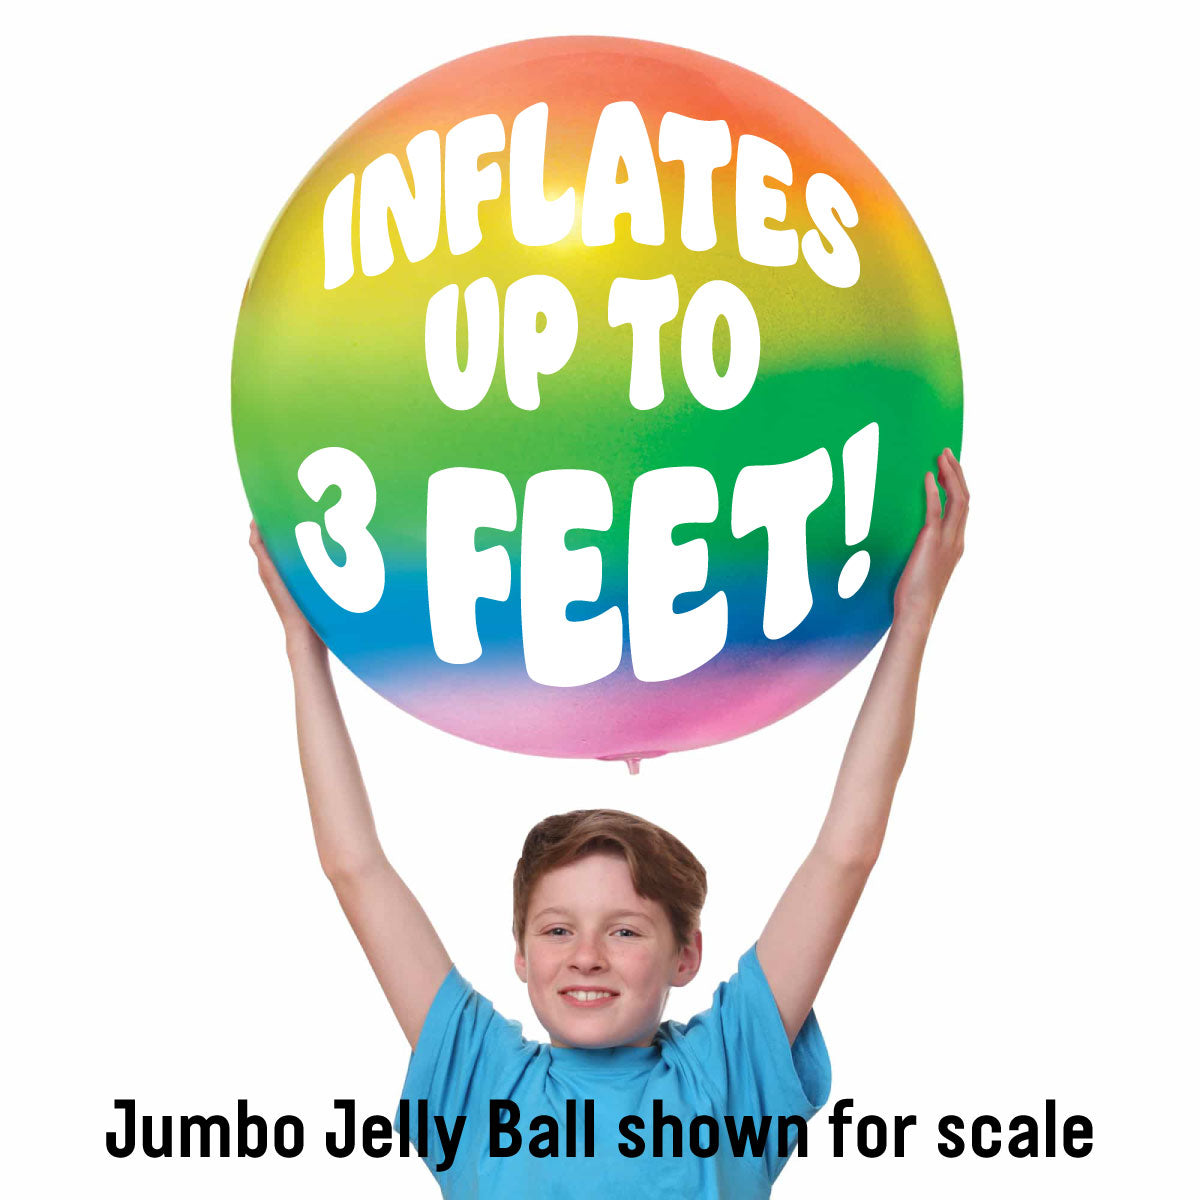 Jumbo Glitter Jelly Ball from Schylling Inflates up to 3 feet!